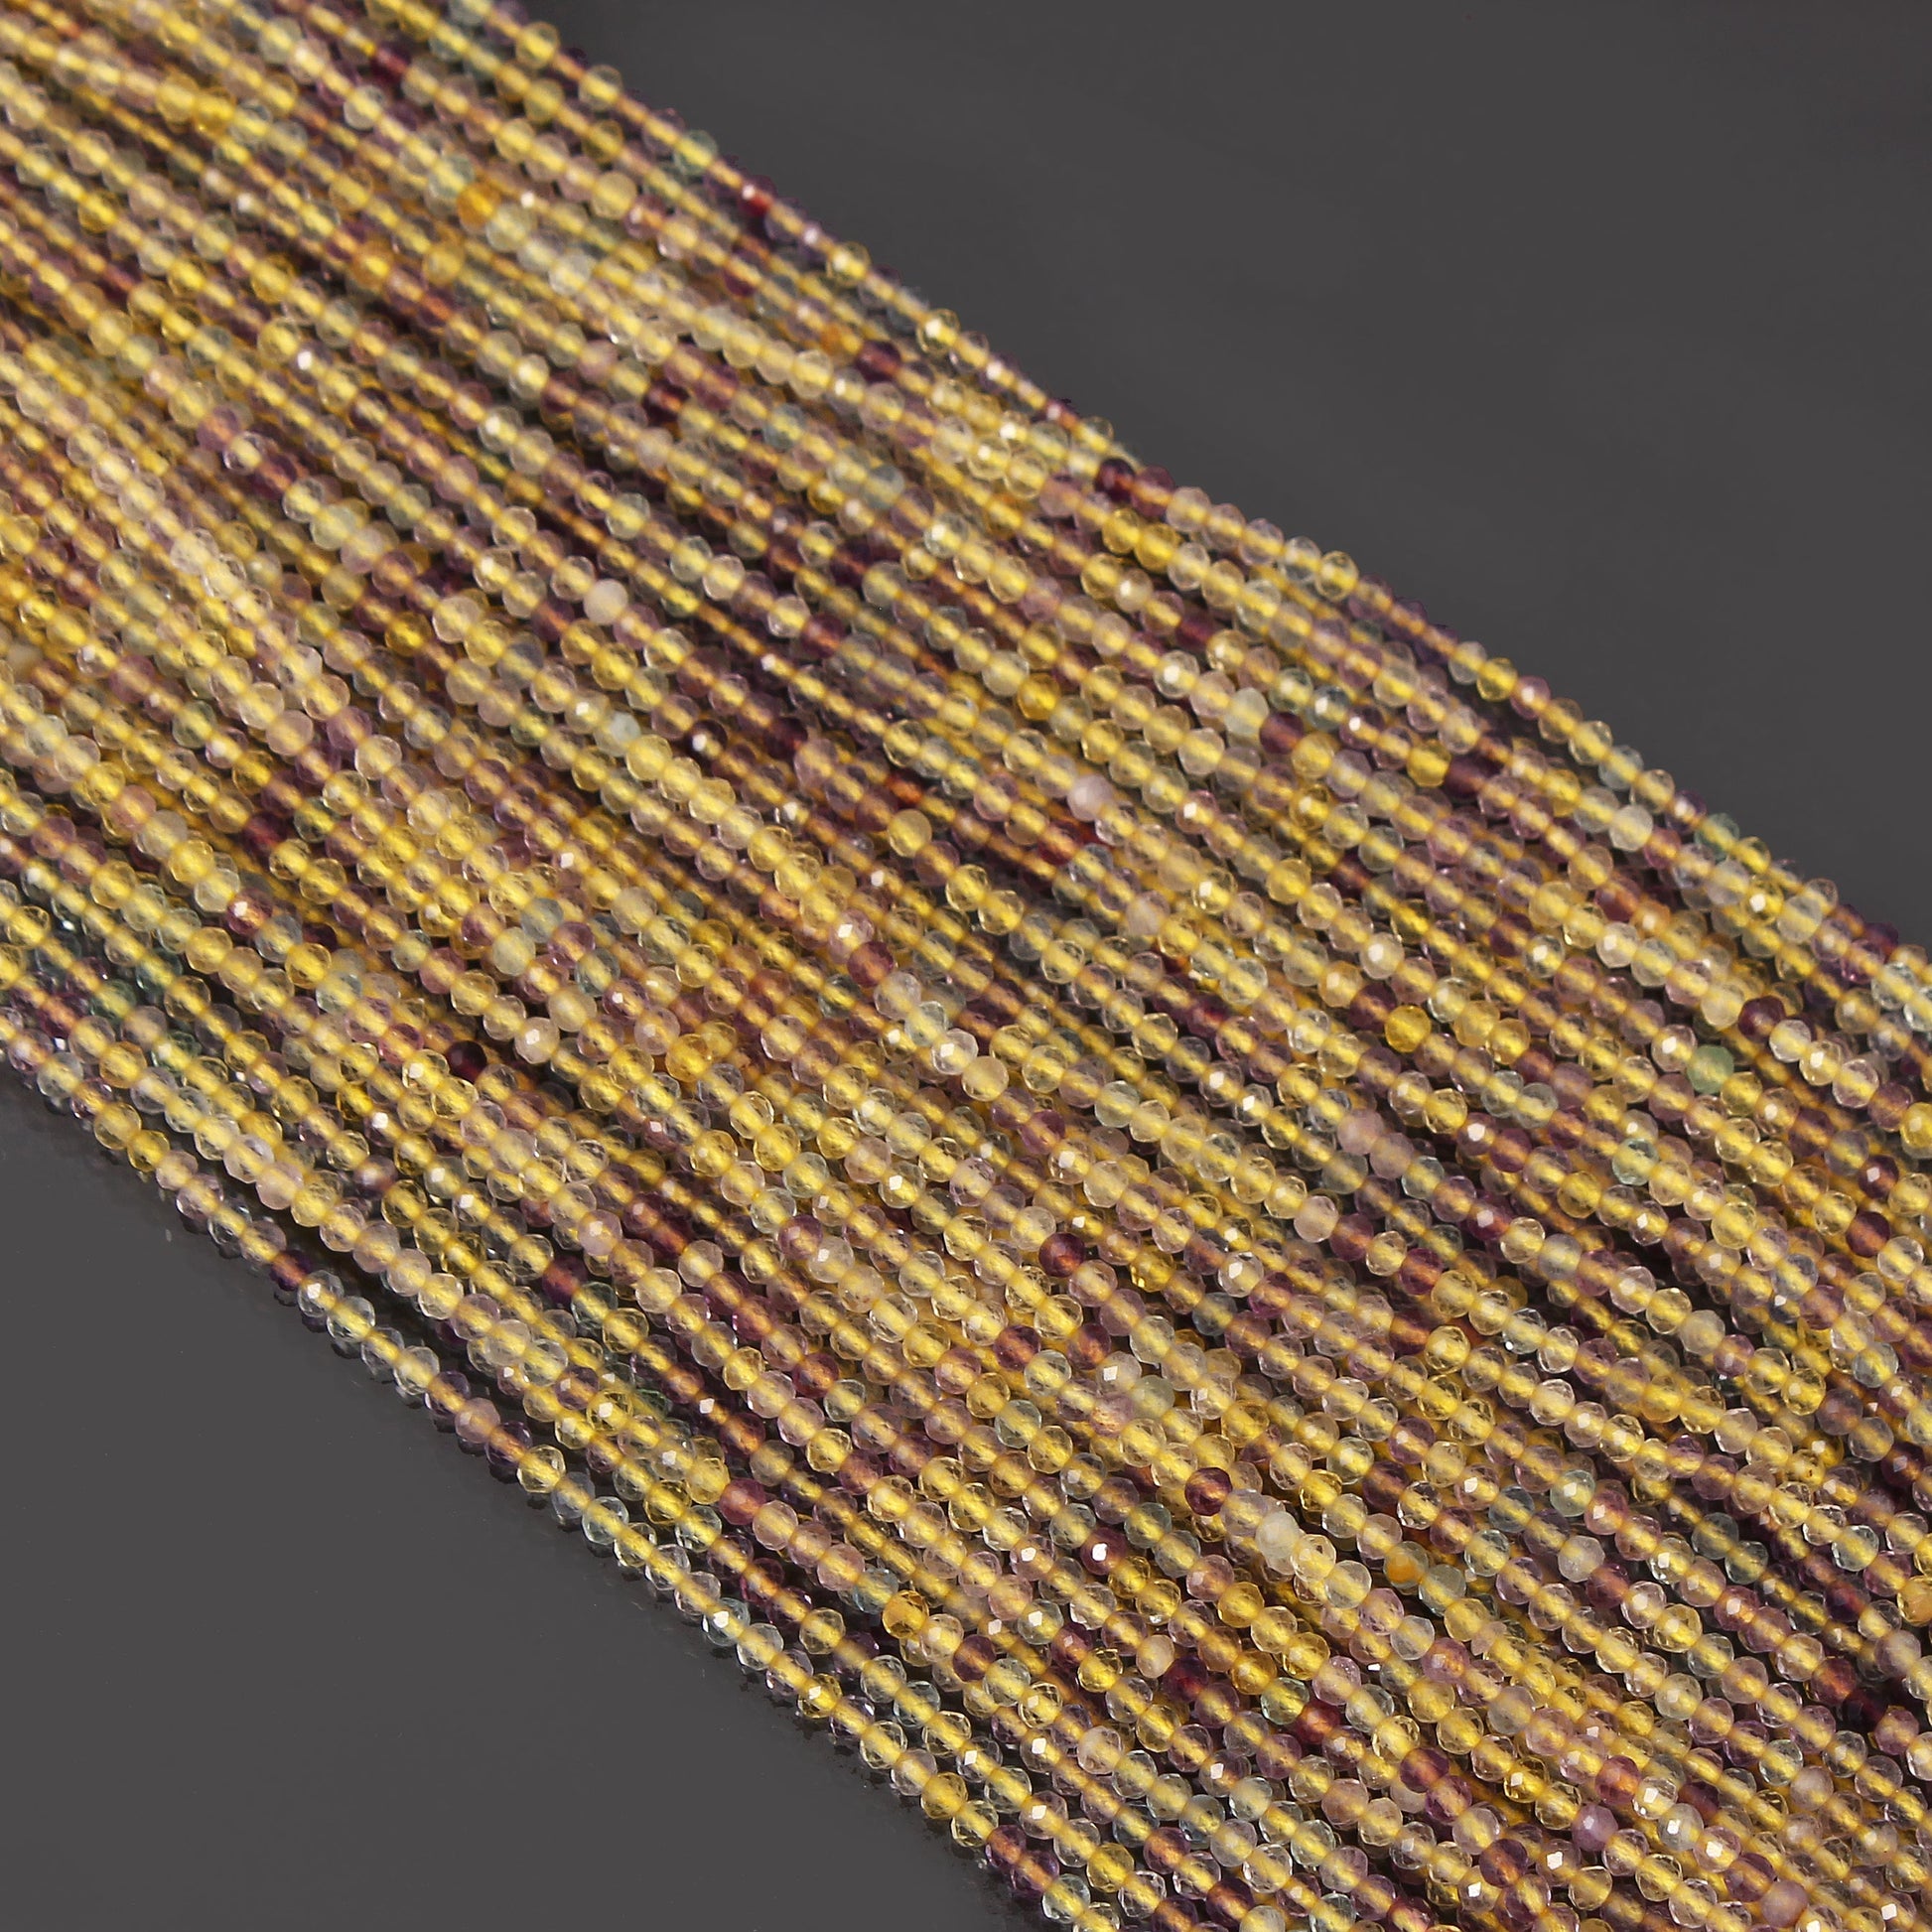 Natural Ametrine Round Beads - 2.5mm-3mm Size, Faceted Cut, 12.5 Inch Gemstone Strand GemsRush